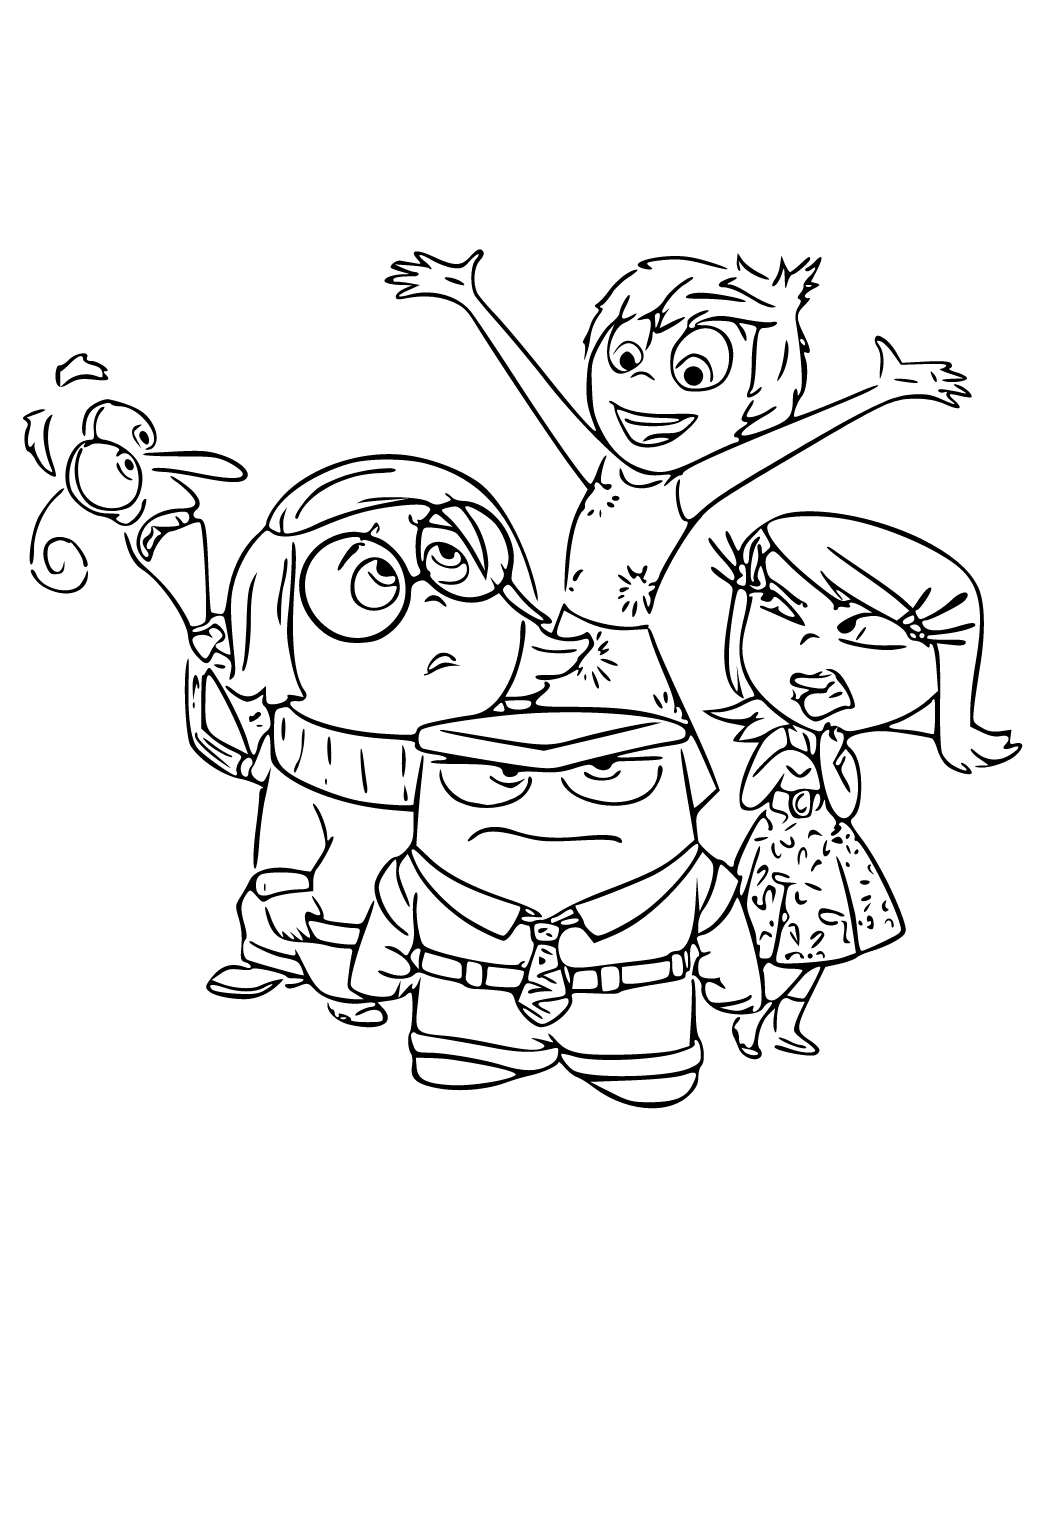 Free Printable Pixar Emotions Coloring Page for Adults and Kids ...